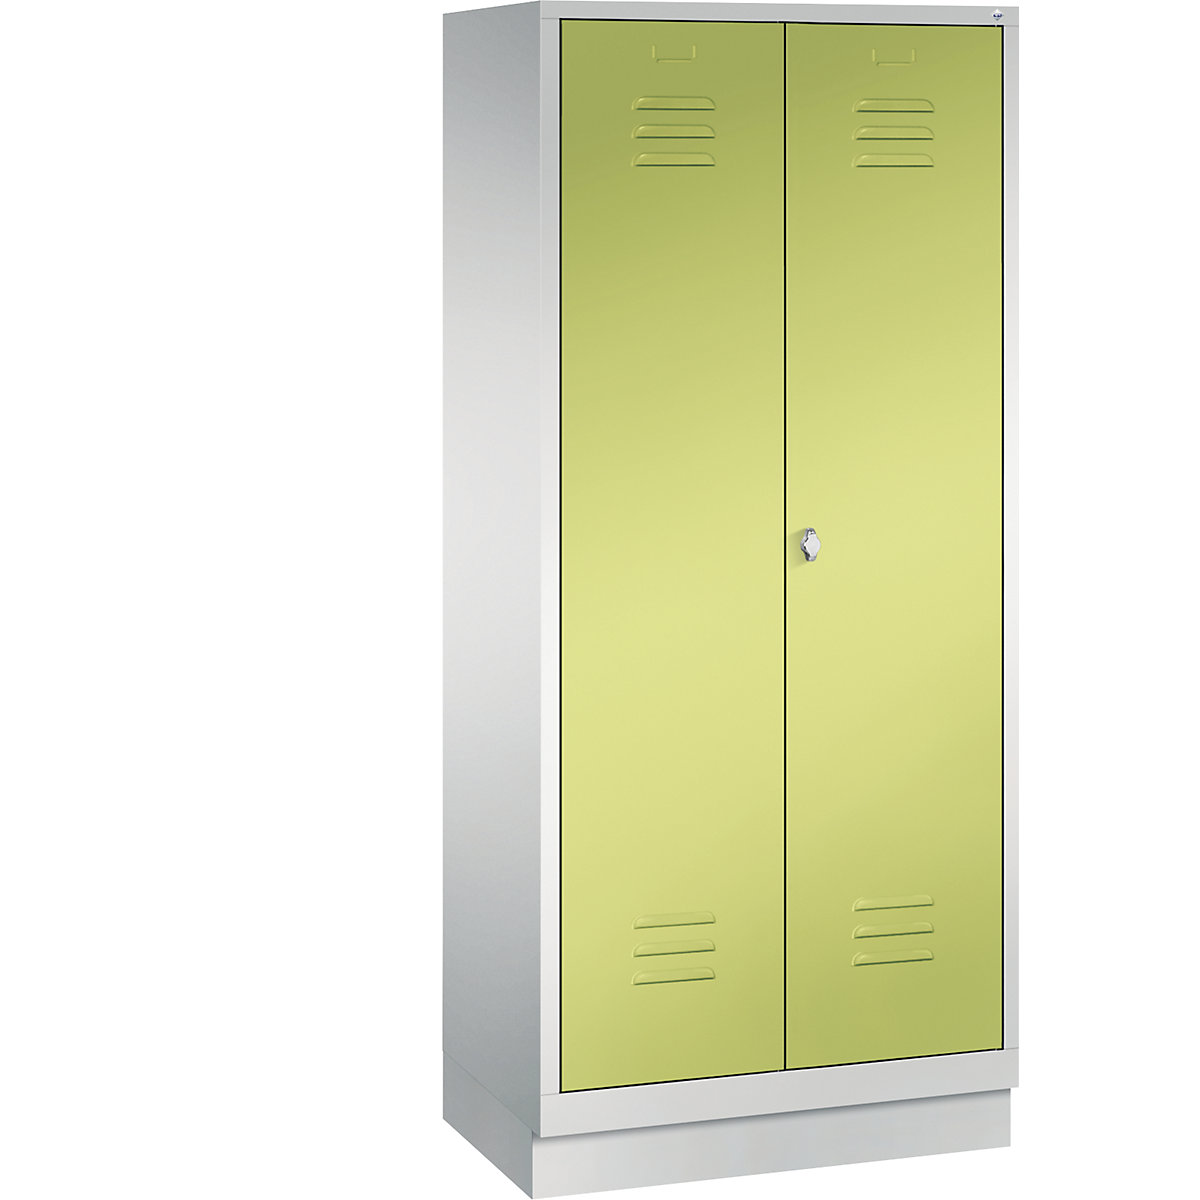 CLASSIC storage cupboard with plinth, doors close in the middle – C+P, 2 compartments, compartment width 400 mm, light grey / viridian green-9